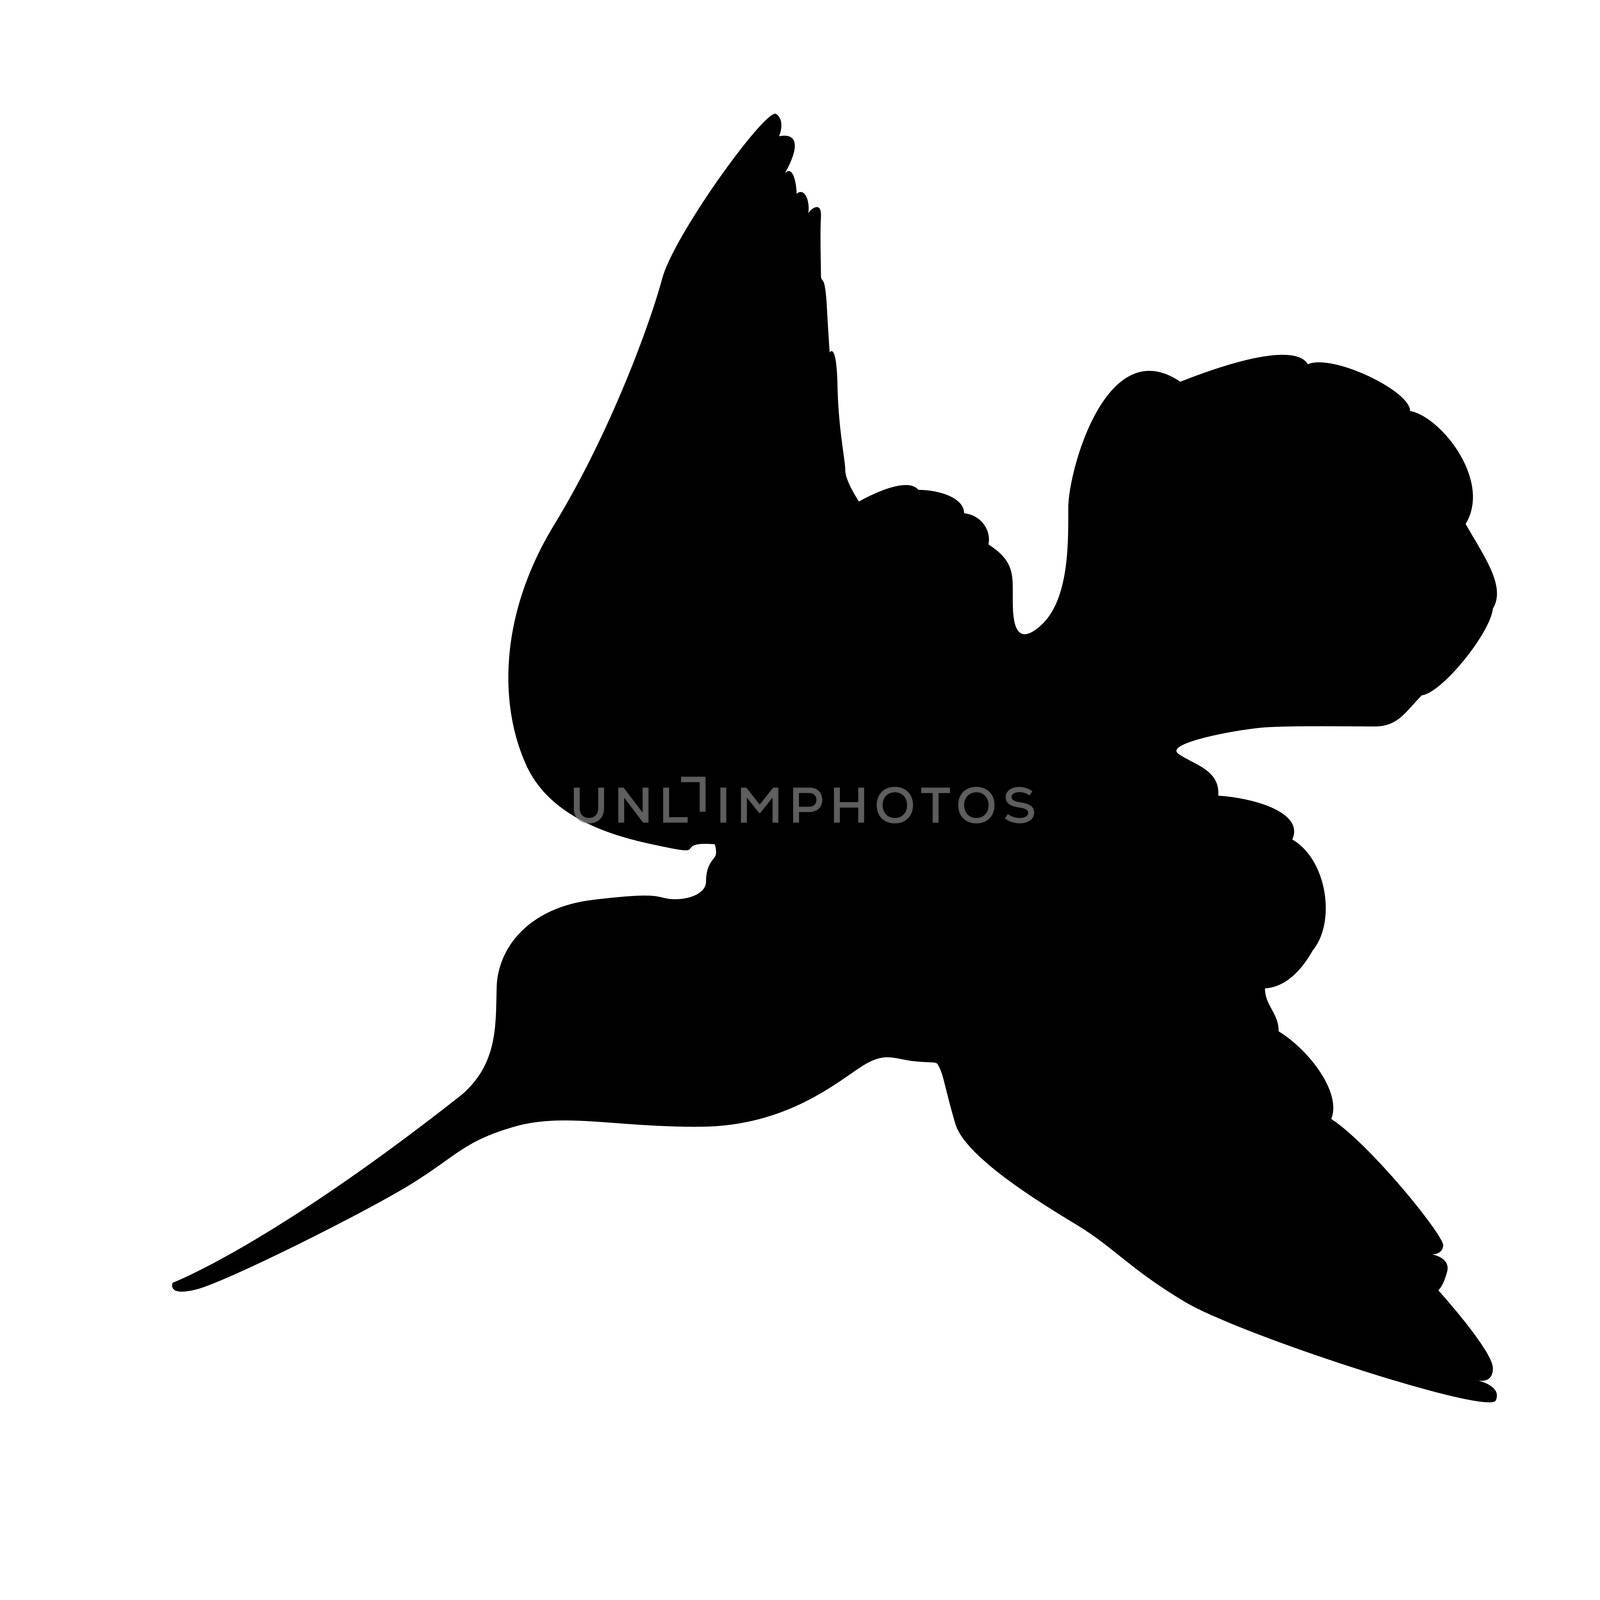 woodcock silhouette on white background, vector illustration by basel101658